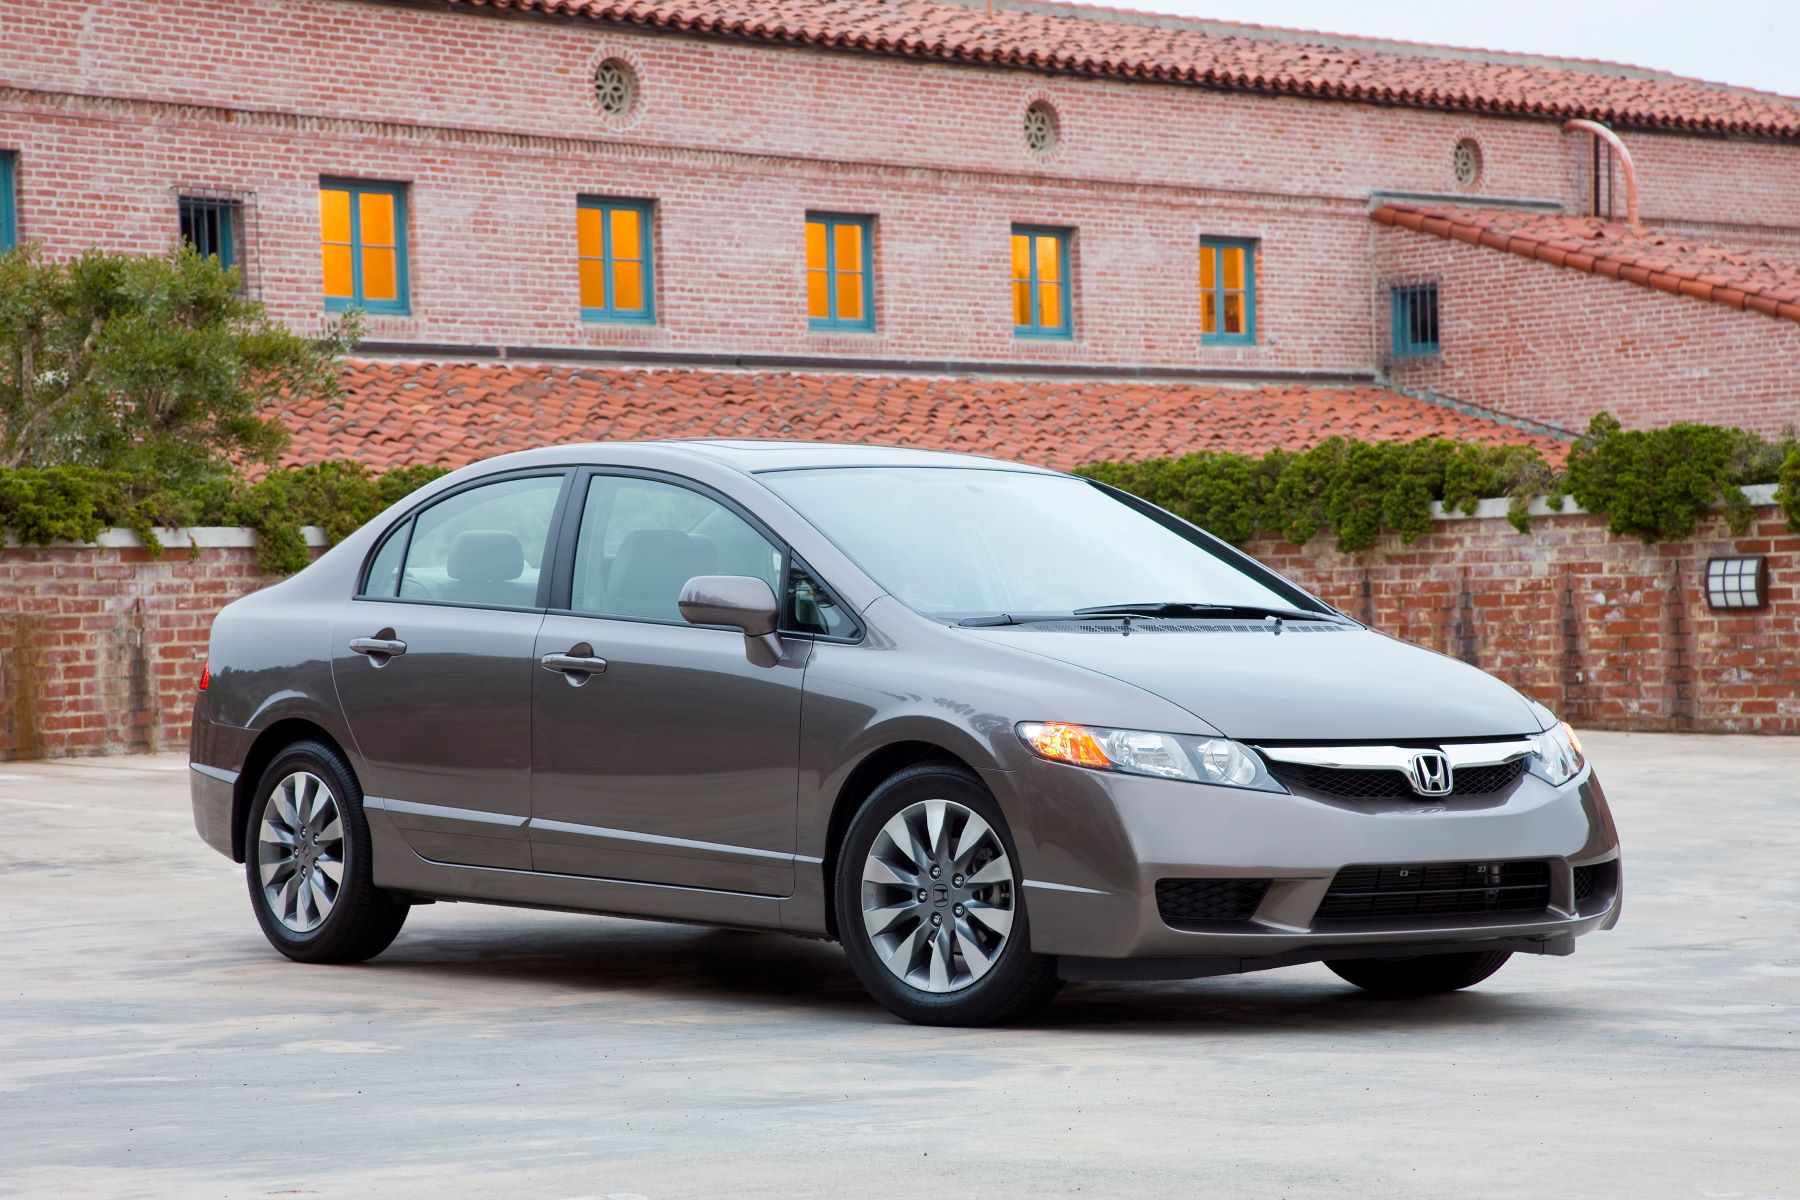 A gray 2009 Honda Civic EX-L compact sedan model parked outside of a red brick building